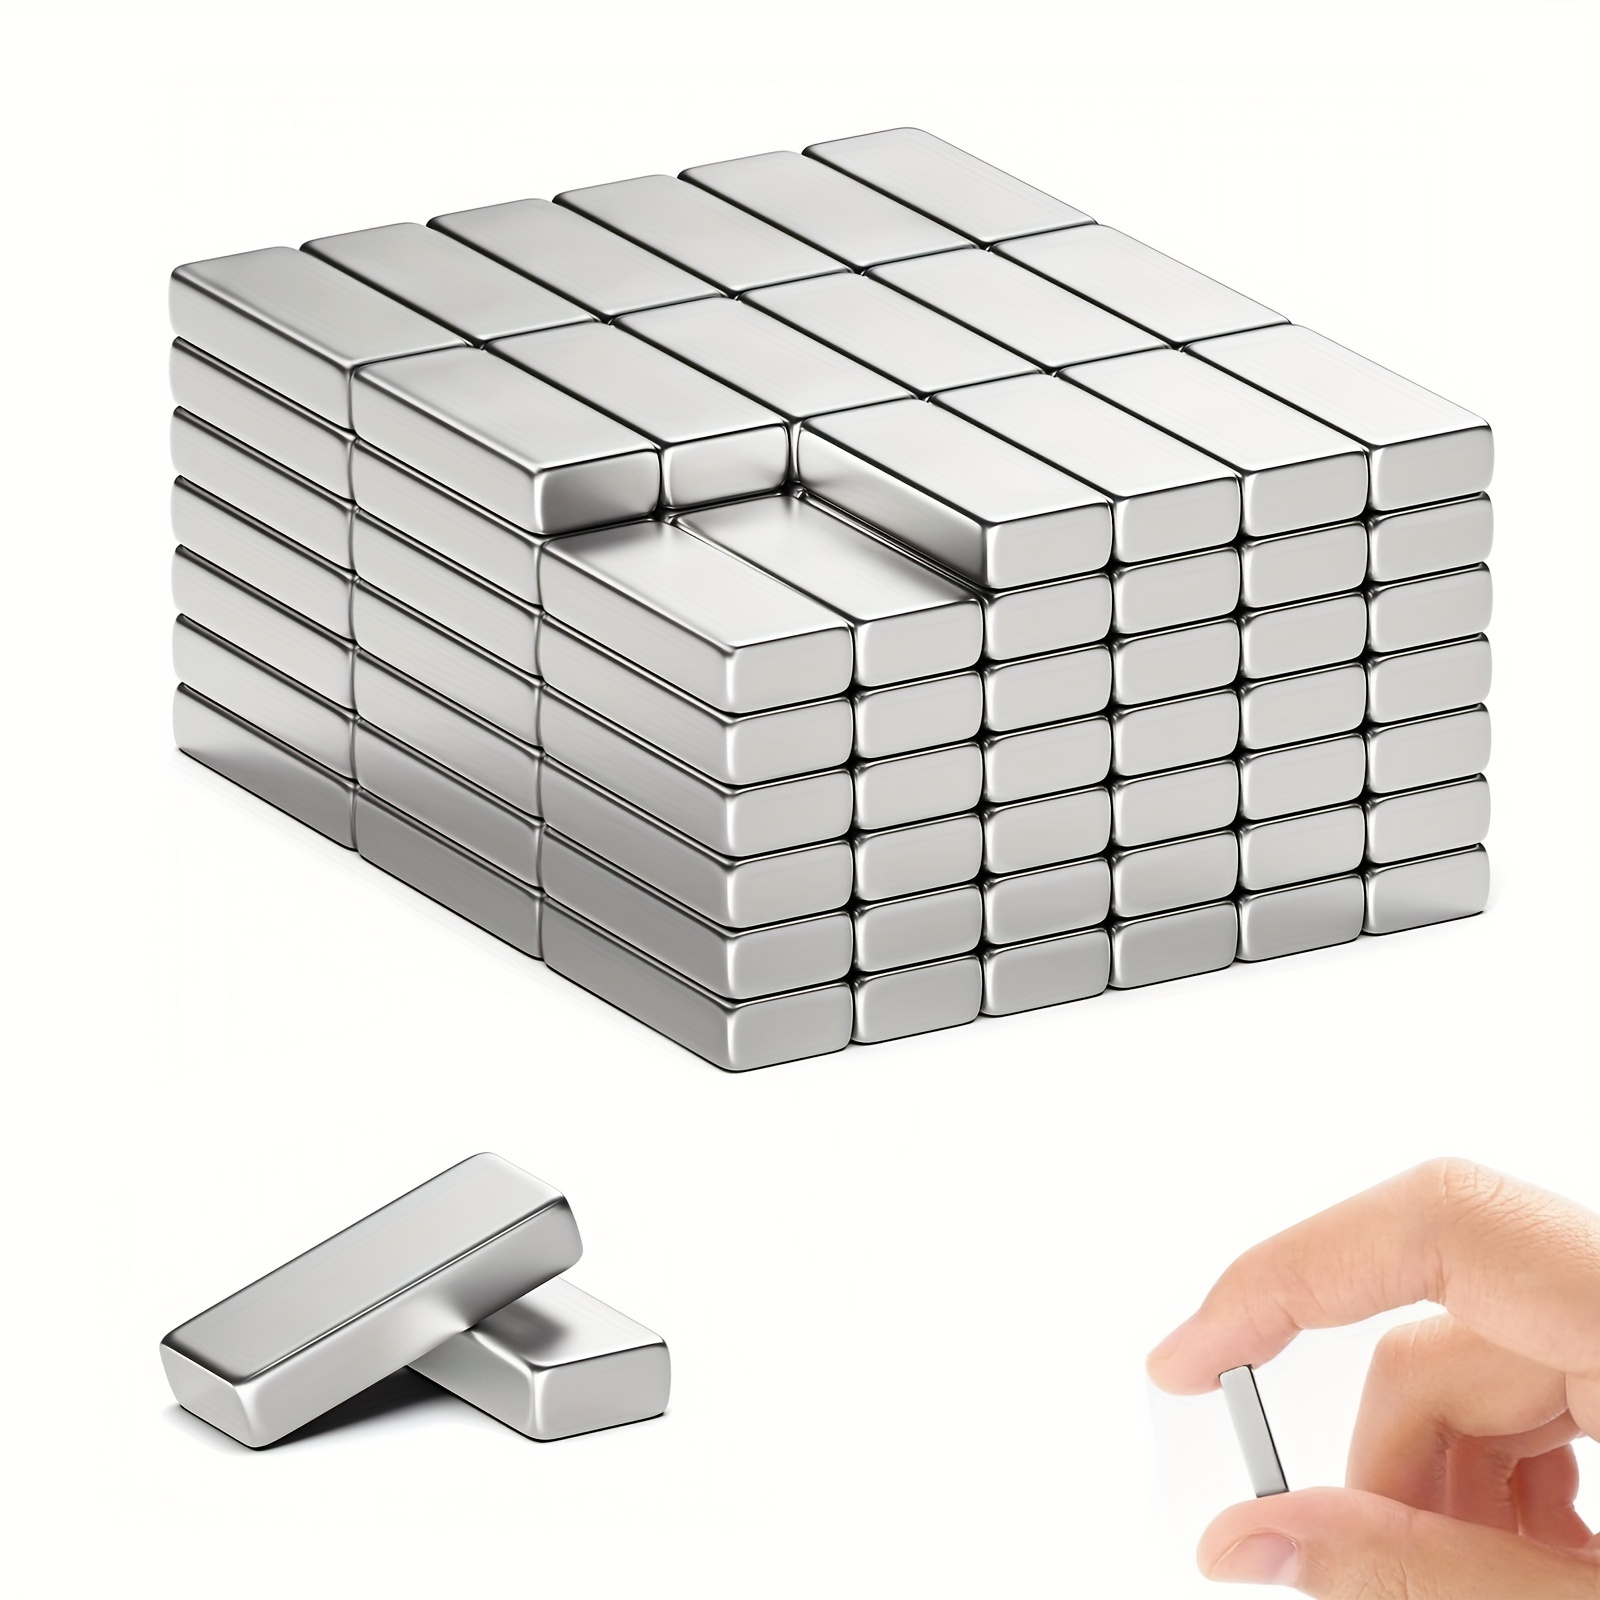 

10pcs/20pcs Strong Neodymium Magnets Bars, 20x5x2mm, Heavy Duty Rare Earth Magnets, Rectangular Magnetic Bar, Small Powerful Magnets For Kitchen Office Tool Storage